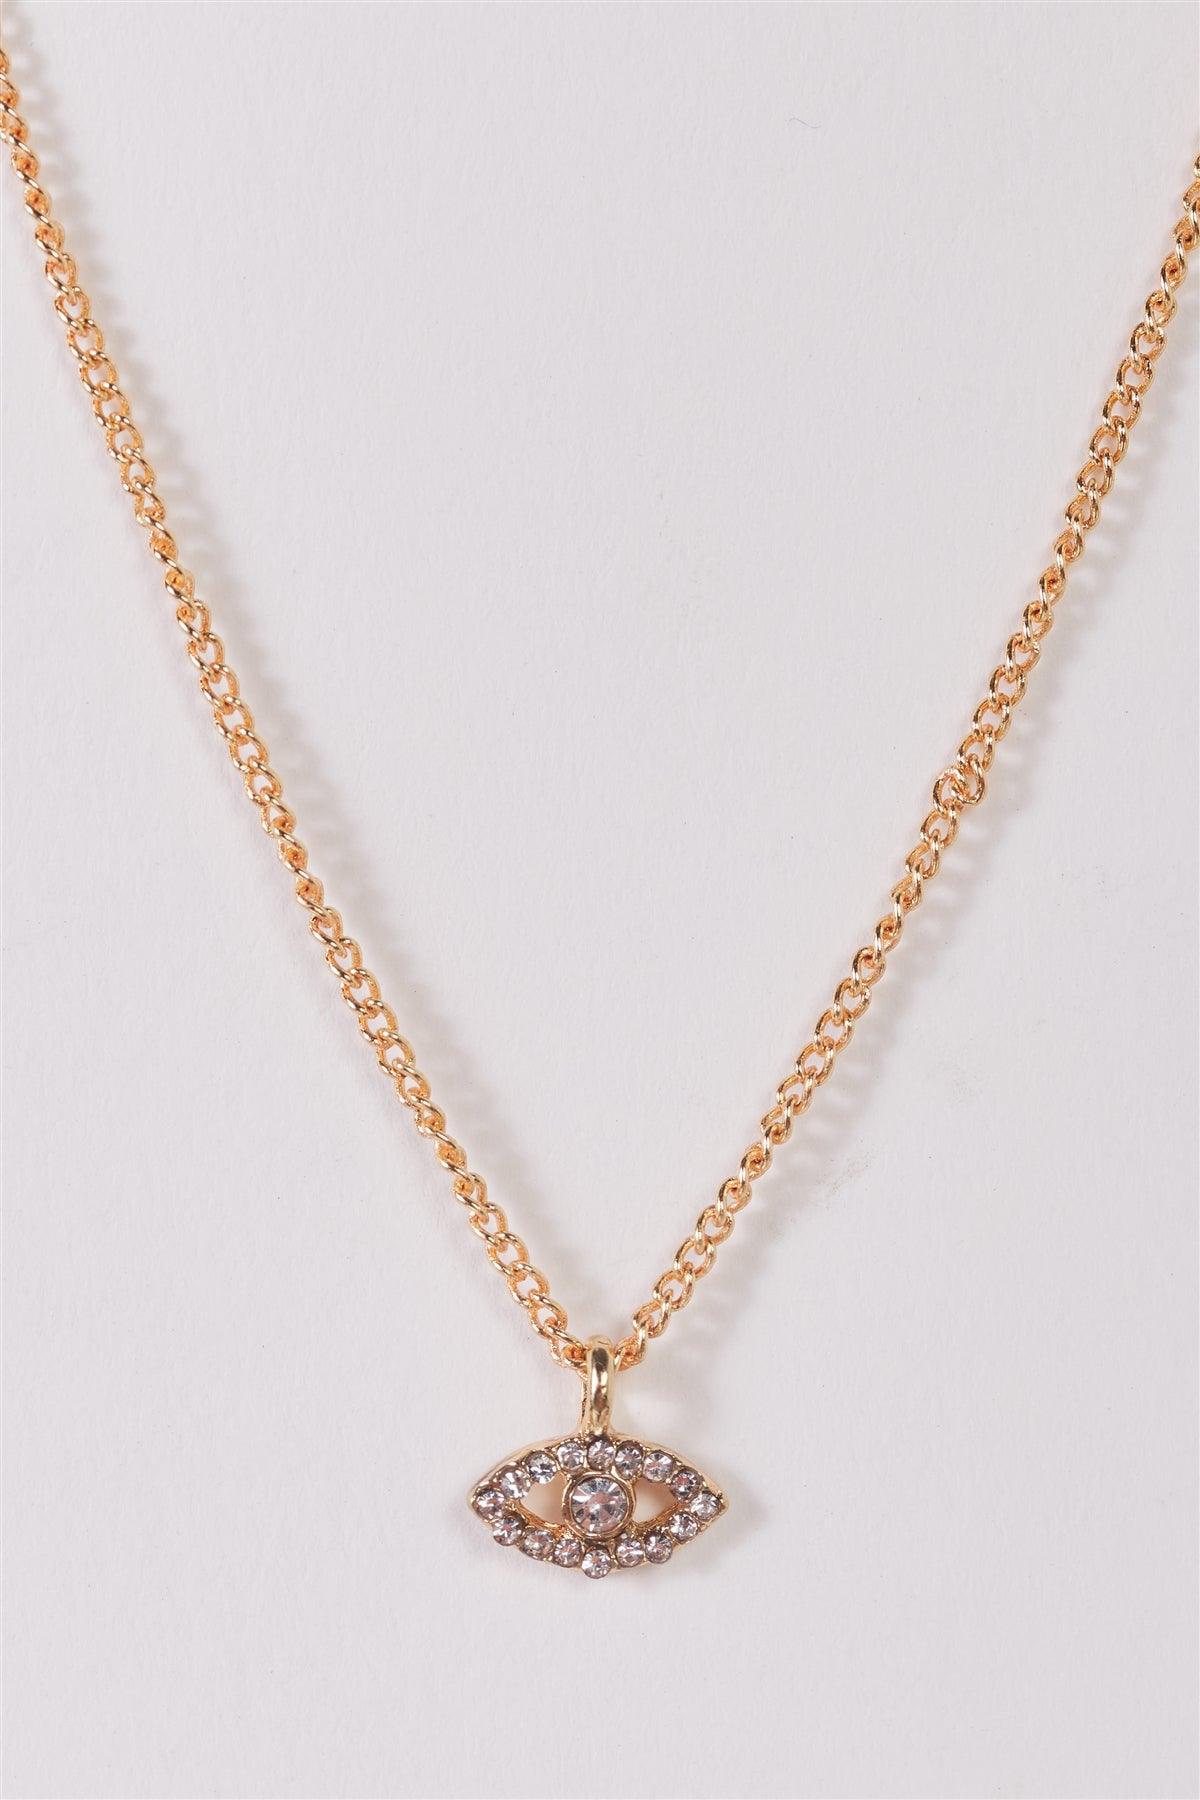 Gold Link Chain With "Evil Eye" Rhinestone Pendant Necklace /3 Pieces